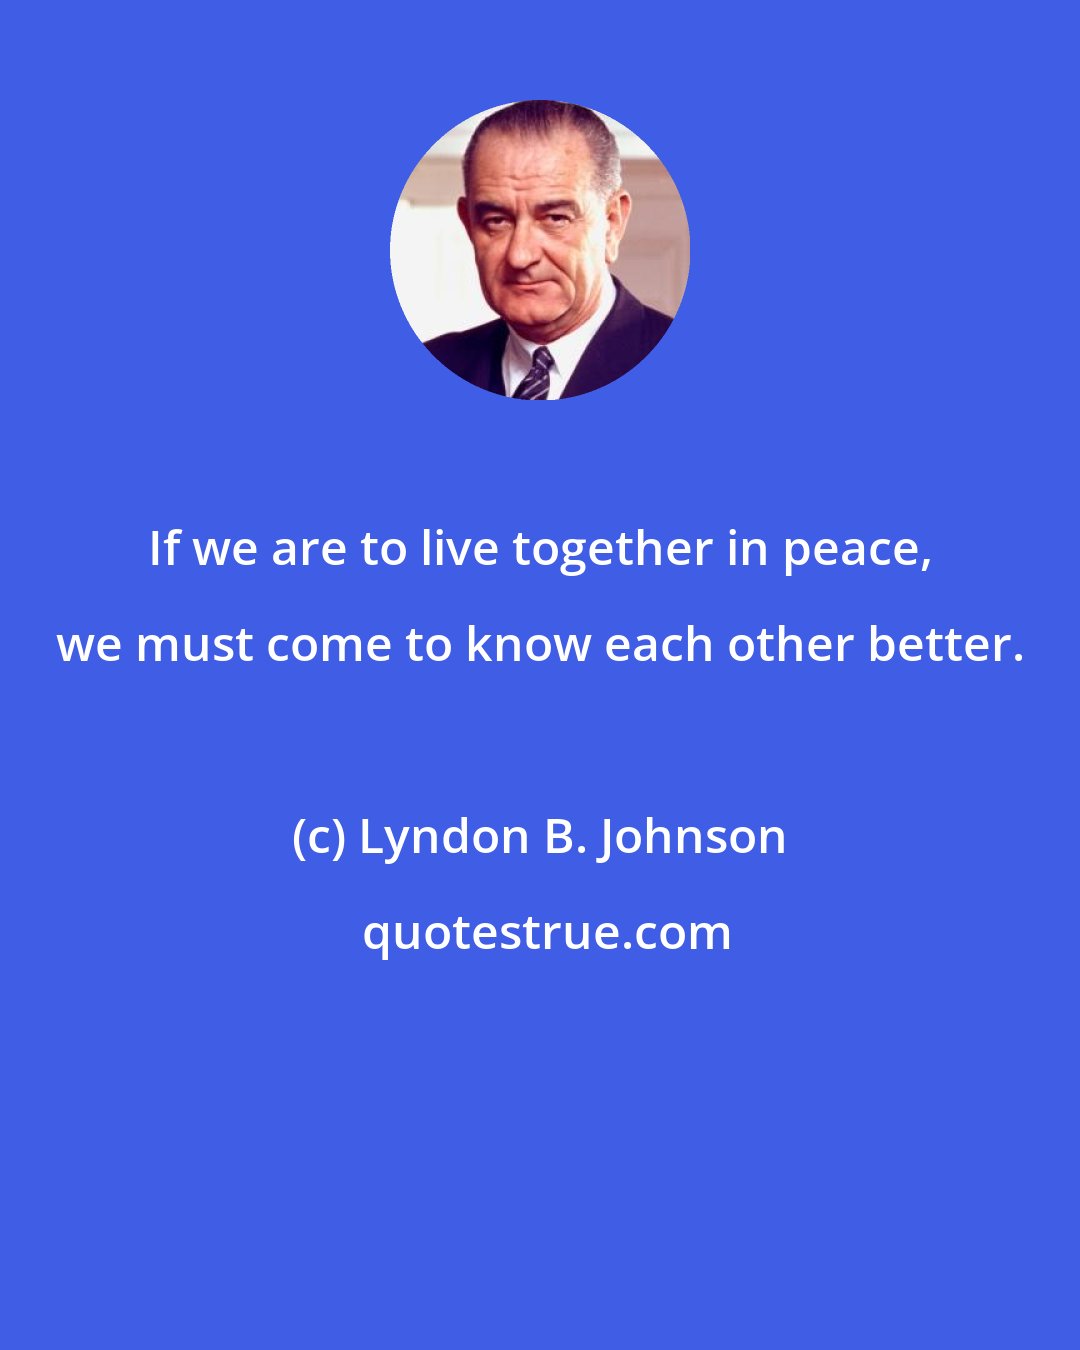 Lyndon B. Johnson: If we are to live together in peace, we must come to know each other better.